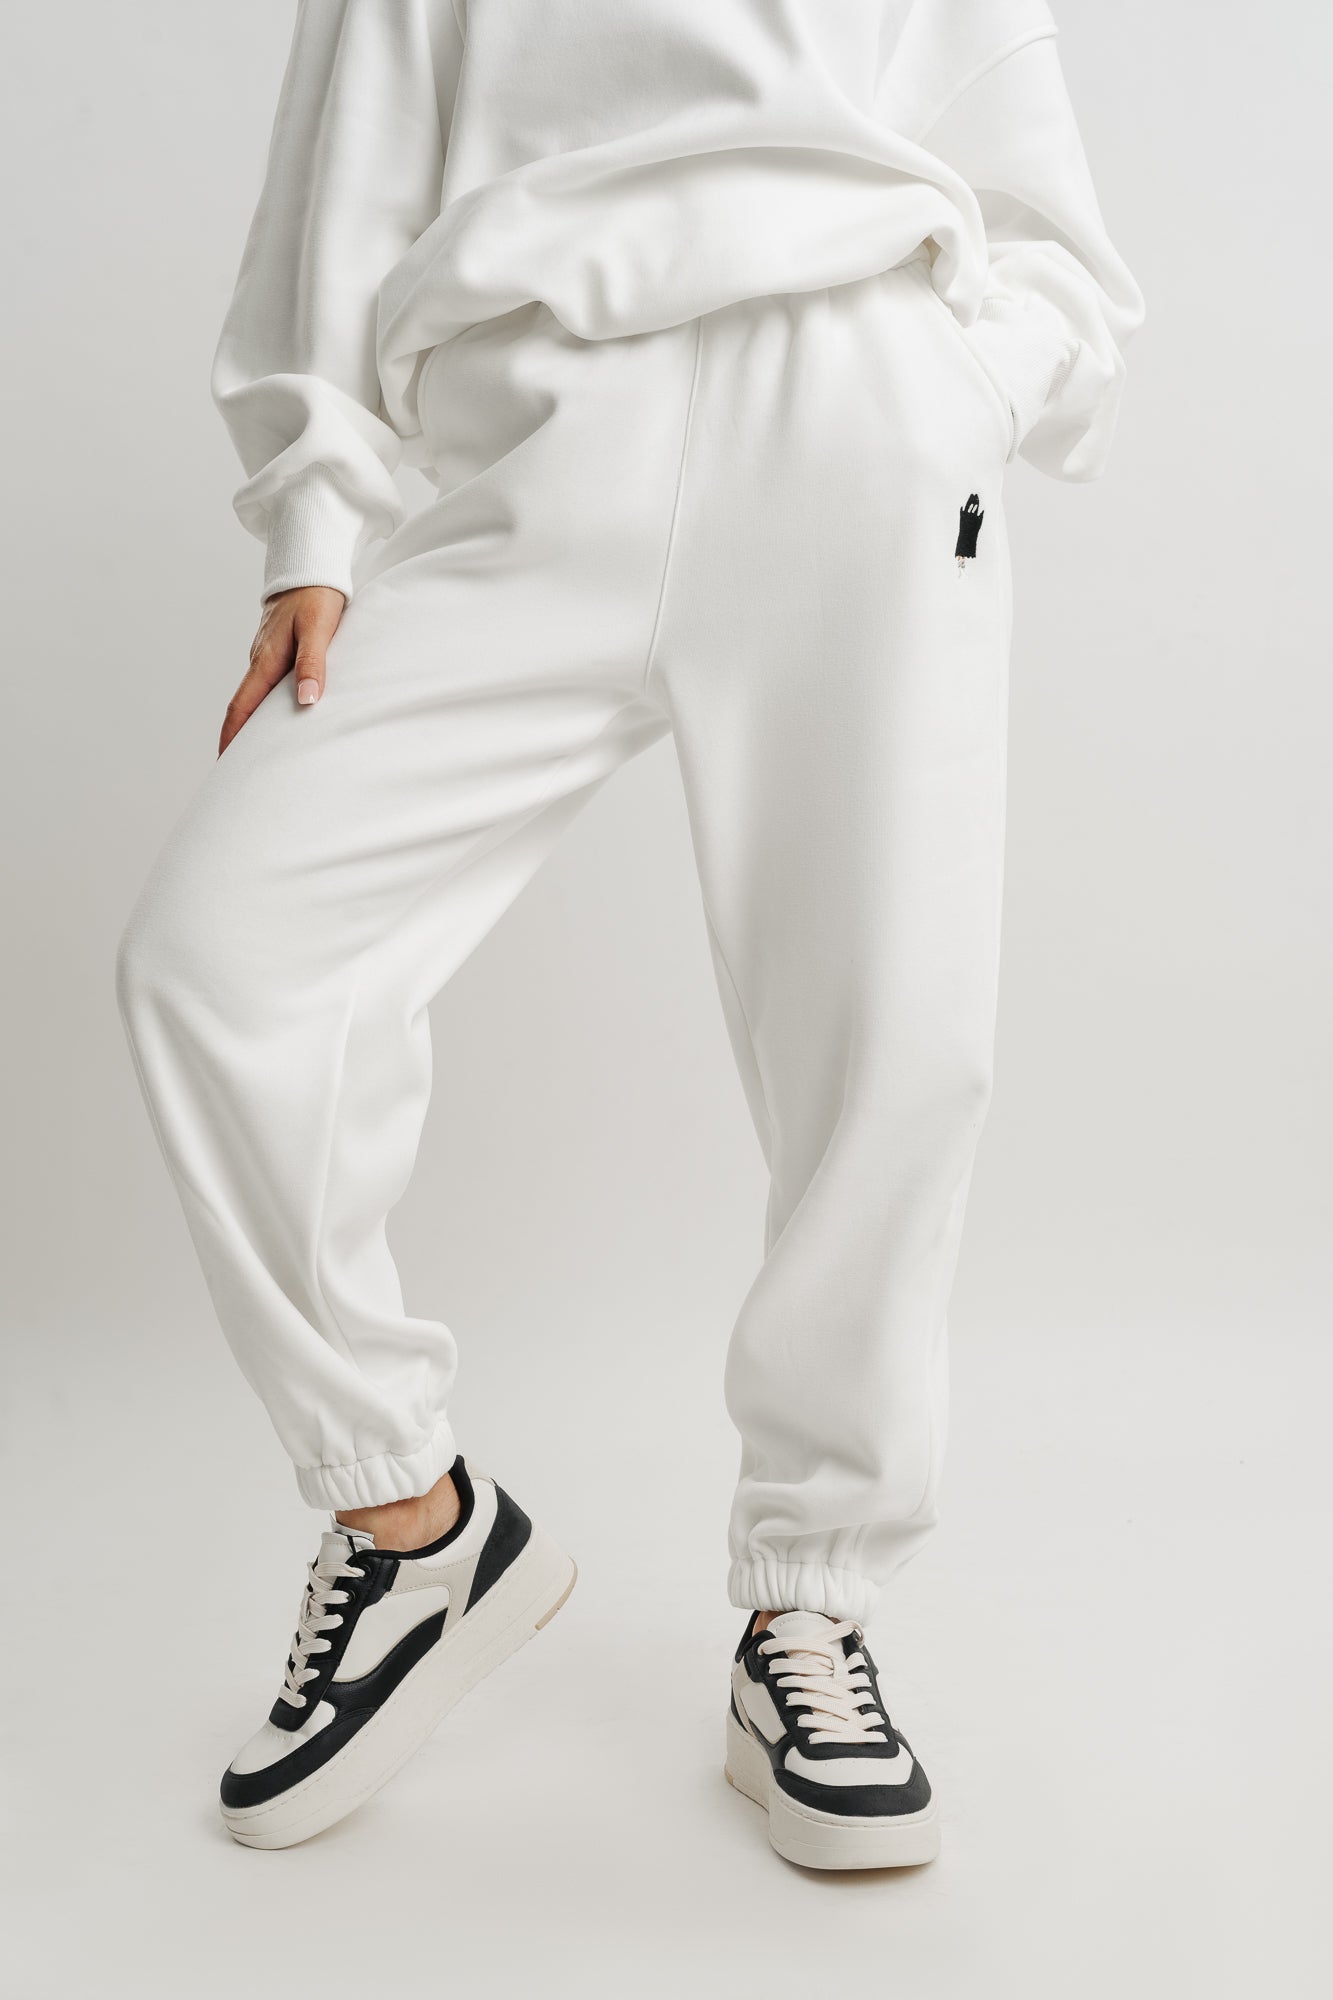 WHITE TWO PIECE SWEATSHIRT AND JOGGER SET